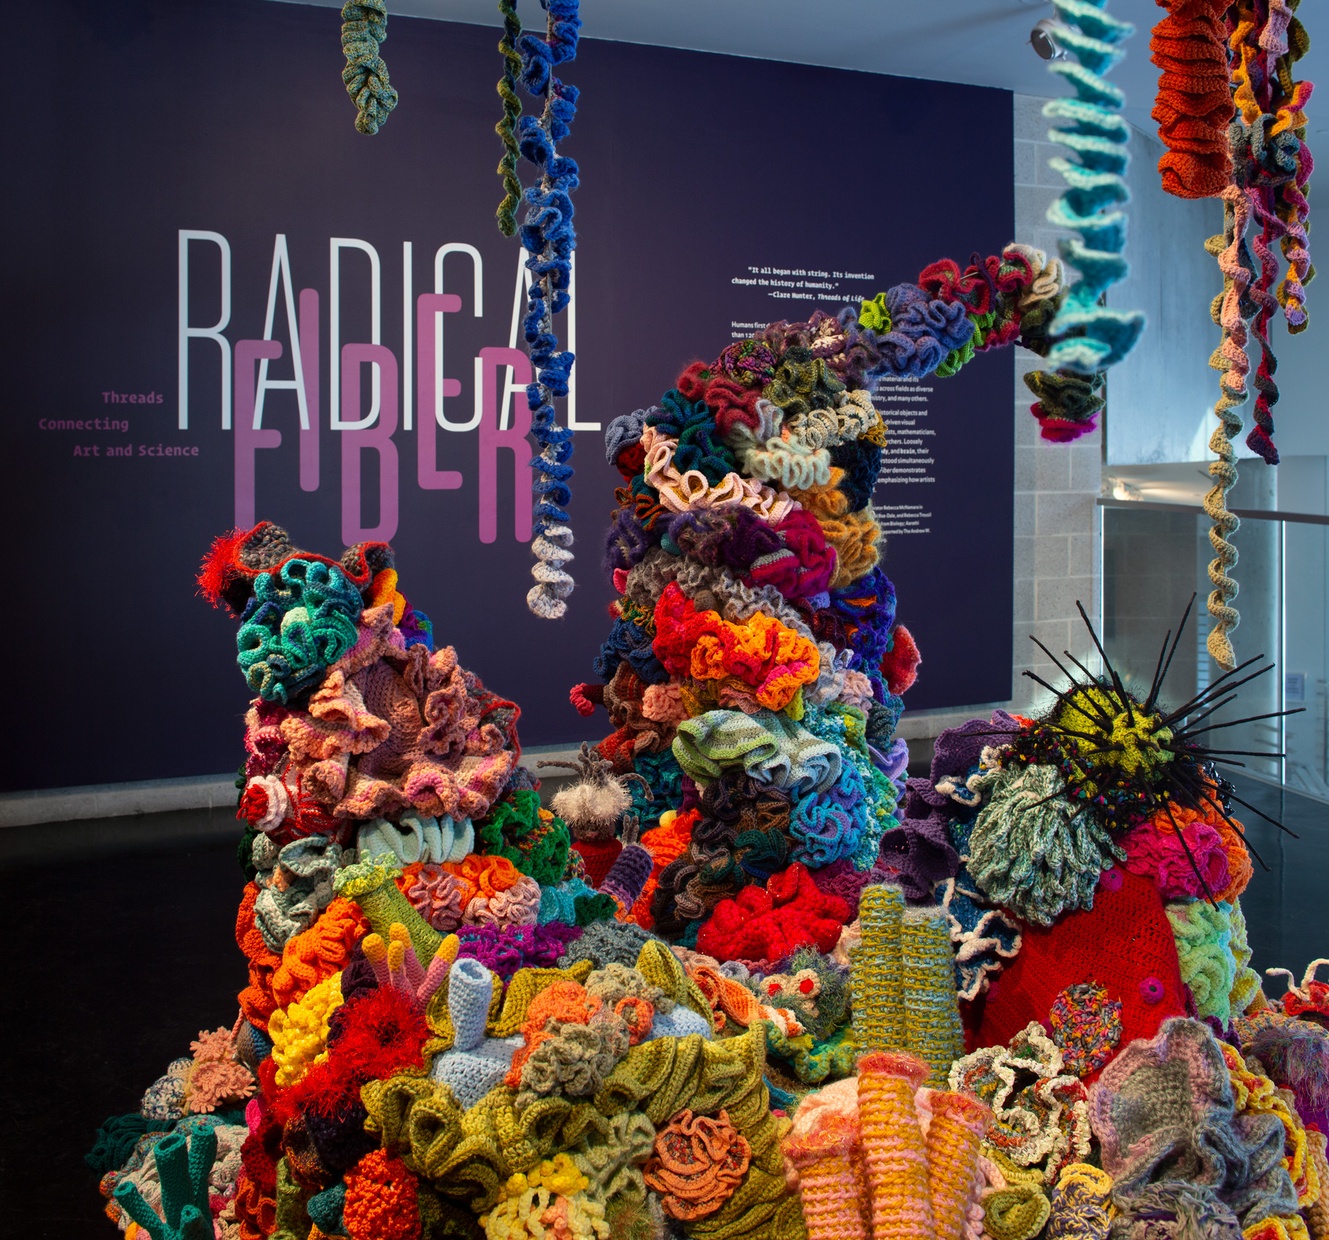 A colorful crocheted coral reef sculpture in front of a purple wall with the words RADICAL FIBER.